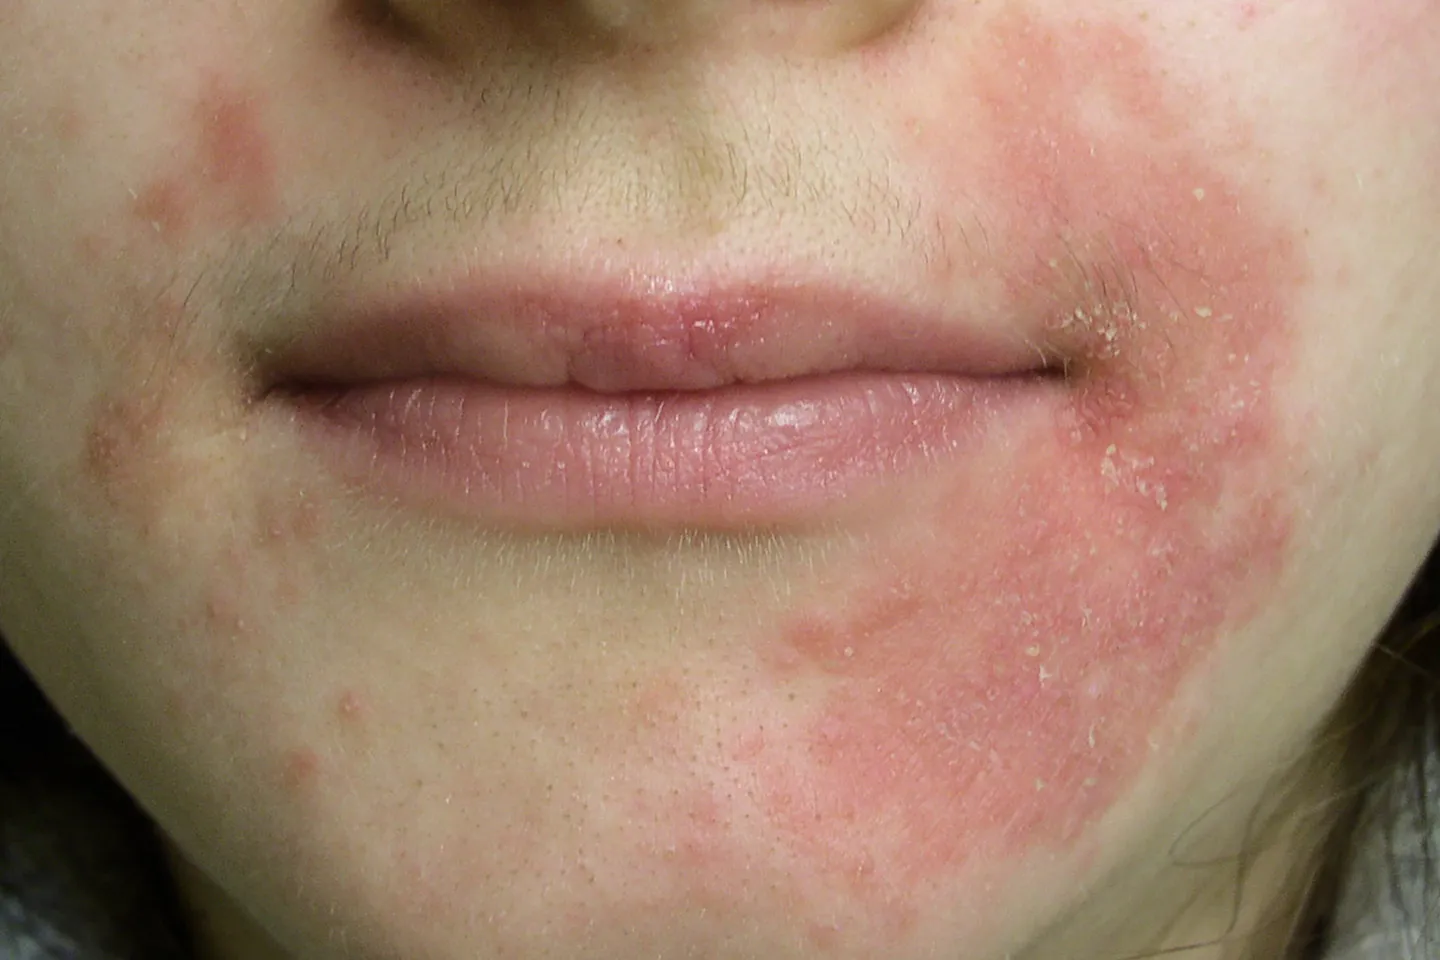 Perioral dermatitis is a red rash that circles the mouth